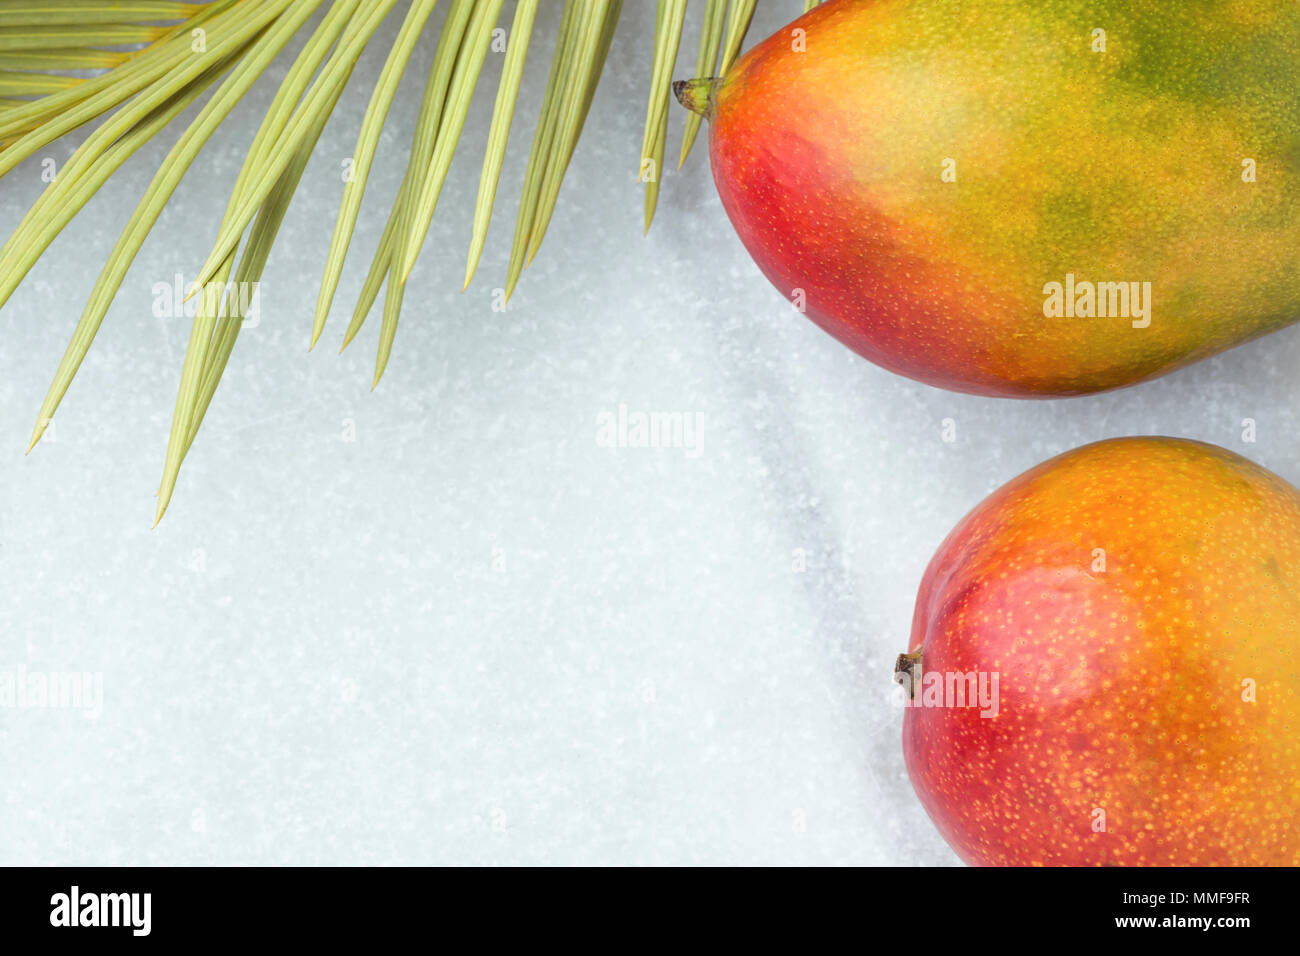 Tropical Nature Background Ripe Juicy Red Mango Spiky Green Yellowish Palm Leaf Scorched by the Sun. Healthy Food Lifestyle Vitamins Summer Travel Vac Stock Photo